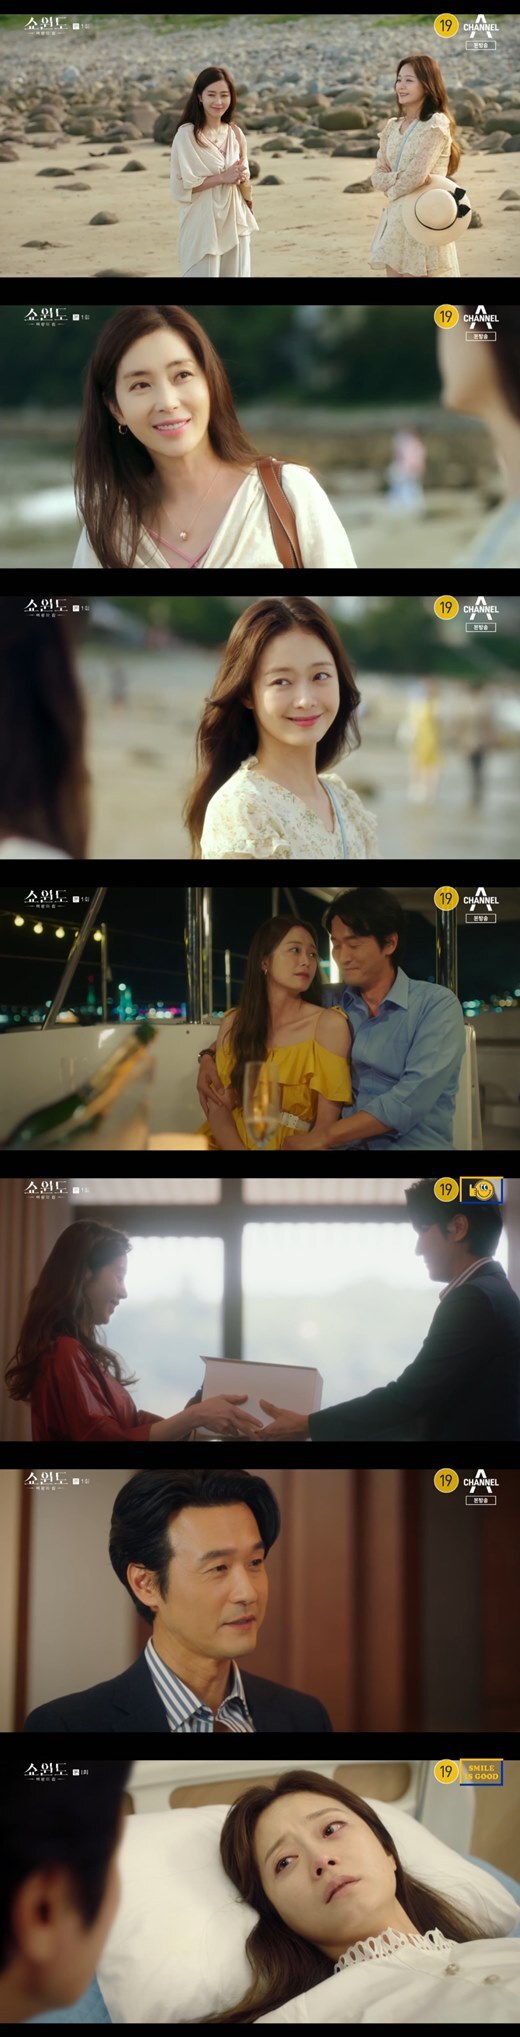 Showwindow: The Queens House Song Yoon-ah, Lee Sung-jae and Jeon So-mins shocking relationship Dawn of the Planet of the Appearance has been unveiled.On the 29th, the comprehensive channel channel A New Moonwha Drama Showwindow: The Queens House (playplayplayed by Han Bo-kyung, directed by Park Hye-young, directed by Kangsol Park Dae-hee) was first broadcast.Showwindow: The Queens House began with the appearance of a happy couple, with Han Sun-joo (Song Yoon-ah) and Shin Myung-seop (Lee Sung-jae) expressing affection toward each other.However, Shin had a surprise meeting with Yoon Mi-ra on a business trip. Yoon Mi-ra kissed Shin Myung-seop, saying, Its fun and fun.Shin Myung-seop had gone on a farewell trip with Yoon Mi-ra, which Myeong-seop planned at the same time as his business trip. They had promised to lets just love for one year.Yoon Mi-ra said to Shin Myung-seop, You should never throw away your family. I am so unhappy if you are not happy. Shin Myung-seop said, Its wonderful.We are a mummy, Yoon Mi-ra said. For our beautiful farewell trip alone.Then, a brand launch show by Shin Myung-seop was held, and a Guddu was released, and Yoon Mi-ra was surprised because it was Guddu that she designed.After that, Shin Myung-seop met Yoon Mi-ra, who came to the brand launch show, and said, How did it go? My gift.Then he whispered to Yoon Mi-ra, You are always the queen to me.After that, Han Seon-ju appeared, and Yoon Mi-ra left. Han Seon-ju told Shin Myung-seop, The launching show was cool. Shin Myung-seop praised Han Seon-ju, saying, The idea is what you gave.After returning to his quarters, Shin Myung-seop met Yoon Mi-ra after telling Han Seon-ju that he had work to do, and Shin Myung-seop and Yoon Mi-ra spent their time alone, and Han Sun-ju thought alone in a room without a husband.Han was traveling alone because of her husband Shin Myung-seops busy schedule. Yoon Mi-ra was also watching alone.The two men had their first meeting, picking up the hat of Yoon Mi-ra, who was blown by the wind.Since then, they have met by chance at a travel destination. Yoon Mi-ra suggested to Han Sun-joo, who is taking a picture alone, I will take a picture. Han Sun-joo also took a picture of Yoon Mi-ra.Han and Yunmira were reunited again, and Yoonmira helped Han Sun-ju, who was in trouble because of the oil from the rental car.Han Seon-ju said she followed her husbands business trip and Yoon Mi-ra came with her boyfriend. Han Seon-ju offered dinner saying, Thank you so much today.However, Yoon Mi-ra left his wallet in a rental car and could not calculate it, so Yoon Mi-ra calculated it instead.Han Seon-ju said, I asked for a contact, but Yoon Mi-ra refused, saying, I made fun memories thanks to my travel mate. Han Sun-joo said to Yoon Mi-ra, I will keep this grace for the rest of my life.When Han returned to the hostel, he found a note from her husband, Shin Myung-seop, saying, Im sorry I cant stay with you. At that time, Shin Myung-seop was enjoying a ship date with Yoon Mi-ra.He presented Yoon Mi-ra with a red Guddu.The next day, Shin Myung-seop presented Guddu, designed by Yoon Mi-ra, saying, You are the only Guddu you can wear. After that, Shin Myung-seop and Han Seon-ju arrived at the airport to return to Seoul.At that time, Shin Myung-seop was contacted that Yoon Mi-ra was in the emergency room. After Yoon Mi-ra tried to read it, he lost his mind.Shin Myung-seop was next to Yoon Mi-ra, who was alert. Yoon Mi-ra said, I didnt want to make it hard for you. So I tried to break up... Its right to break up...Shin embraced Yoon Mi-ra.